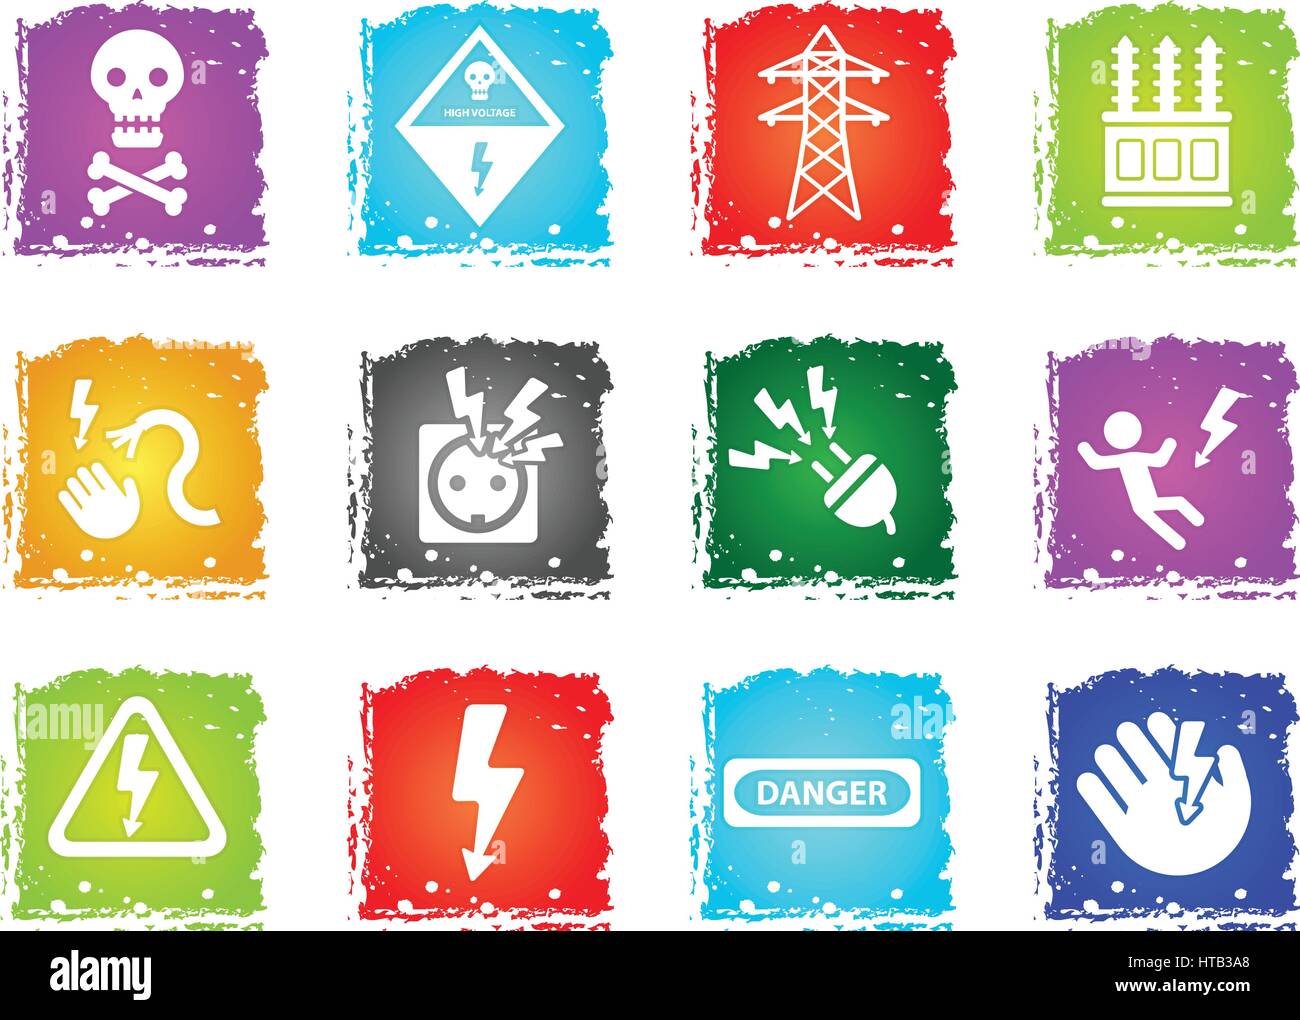 high voltage web icons in grunge style for user interface design Stock Vector